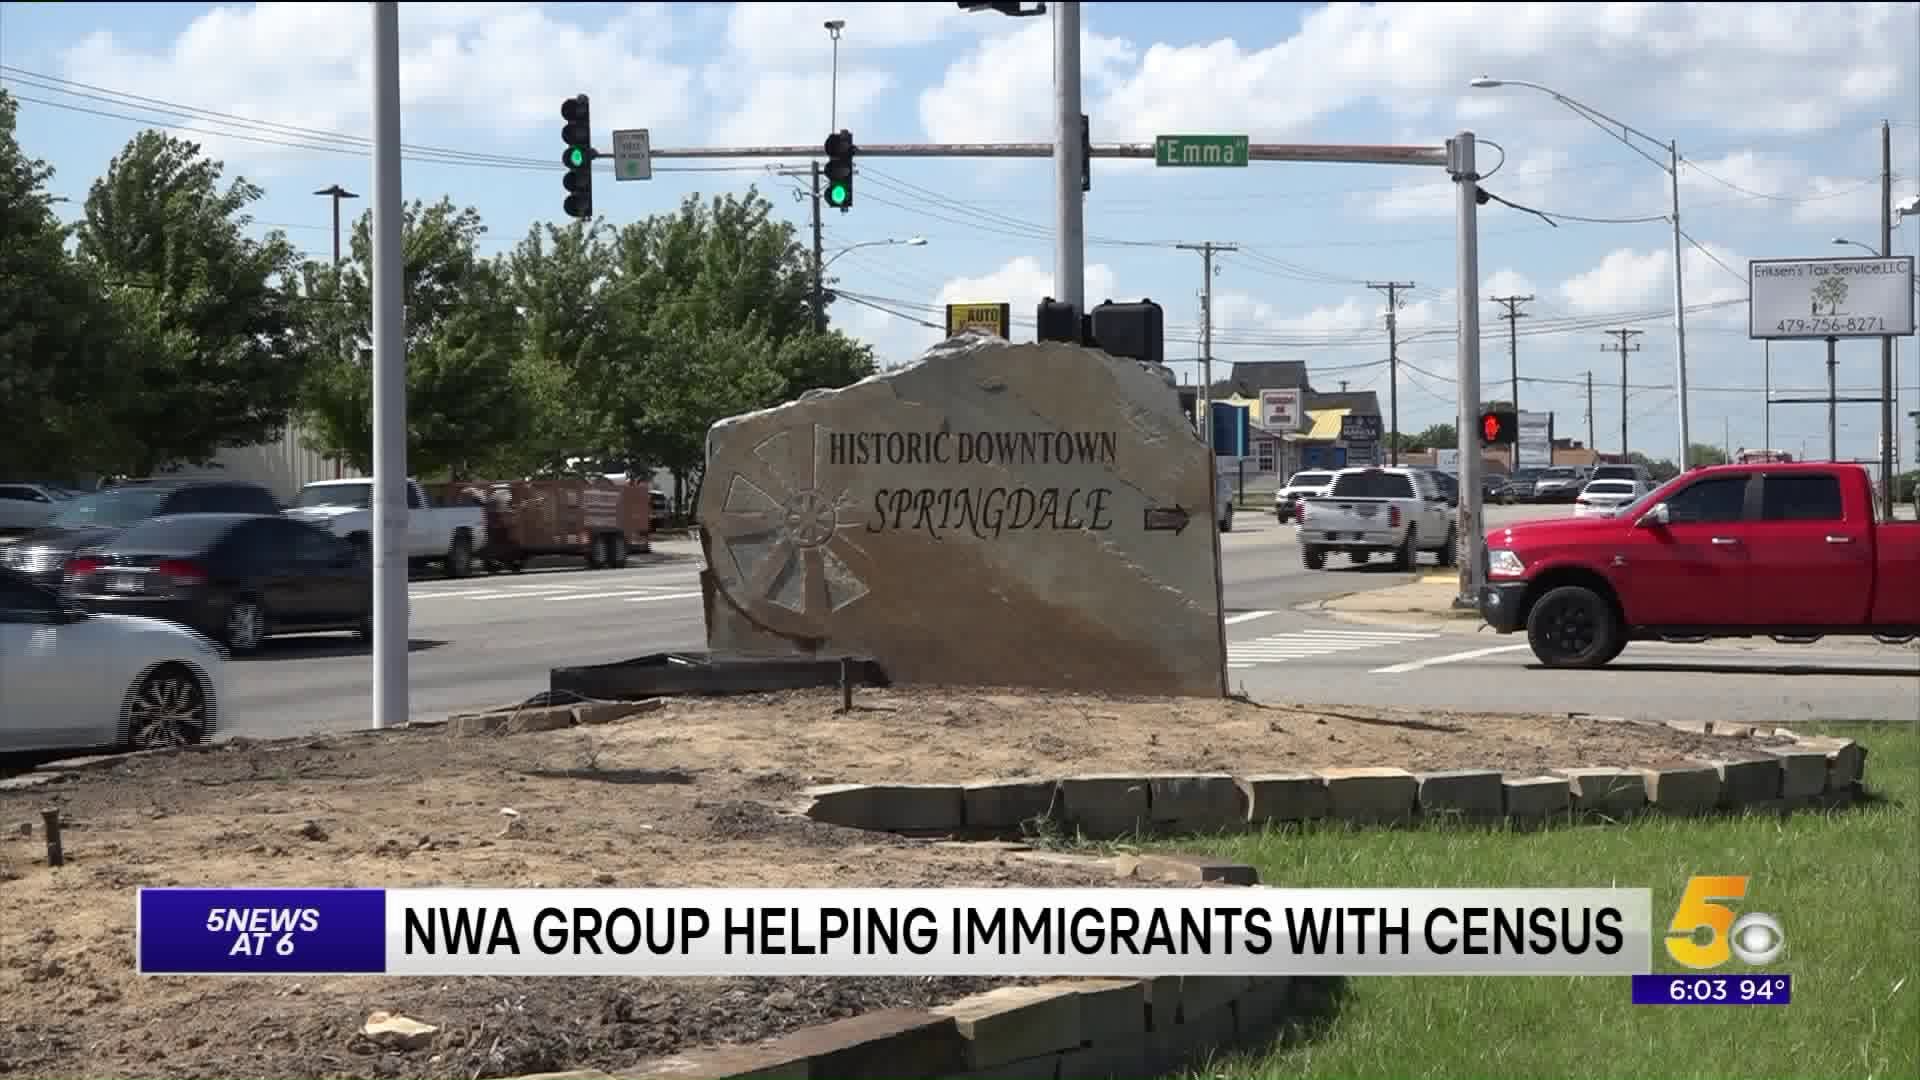 NWA Group Helping Immigrants with Census